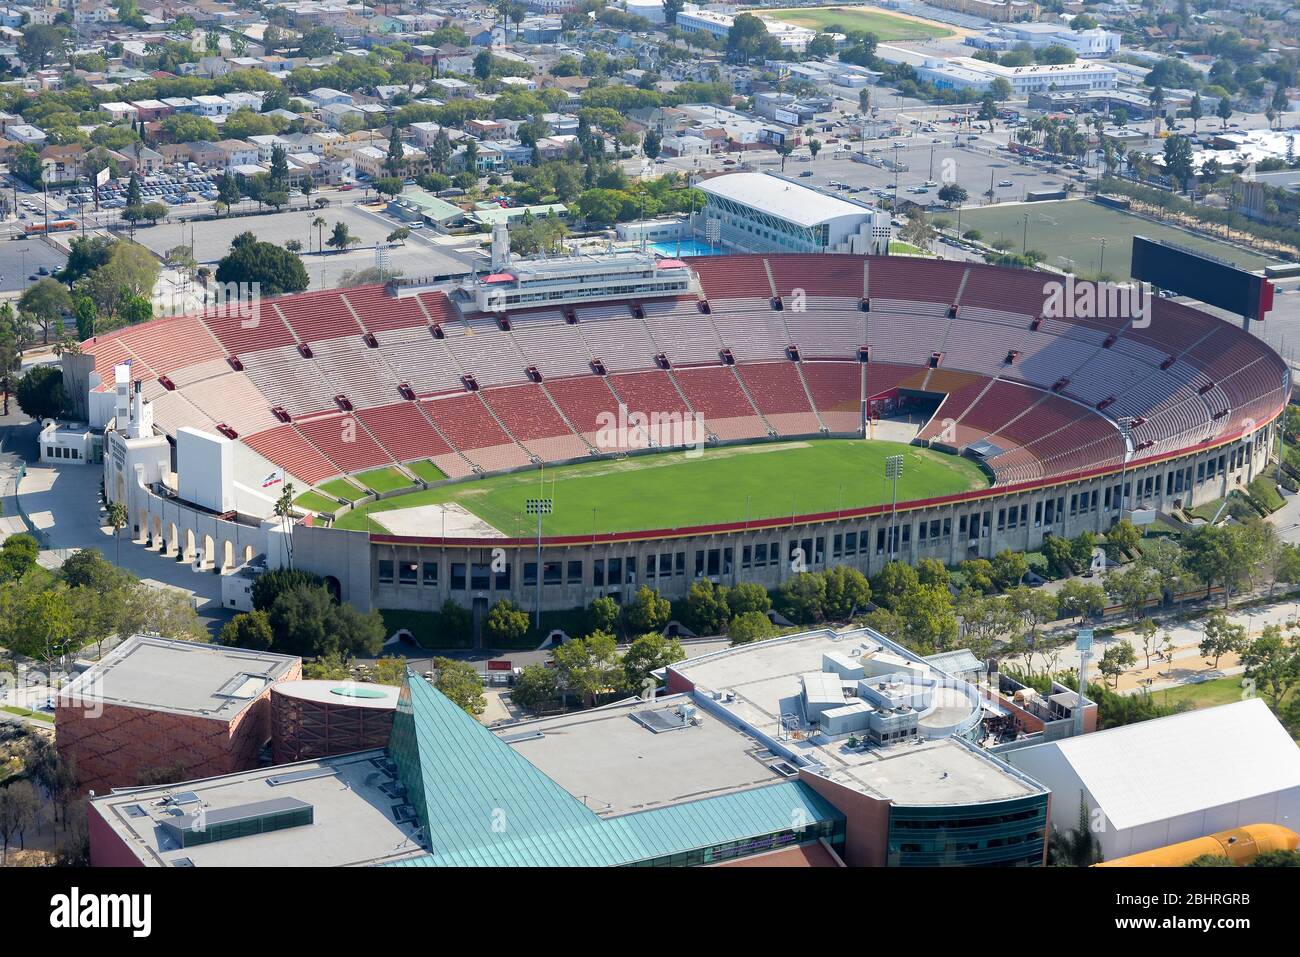 Aerial view of Los Angeles Memorial Coliseum, an Olympic Stadium with a football field. Empty sports stadium stands in California, United States. Stock Photo